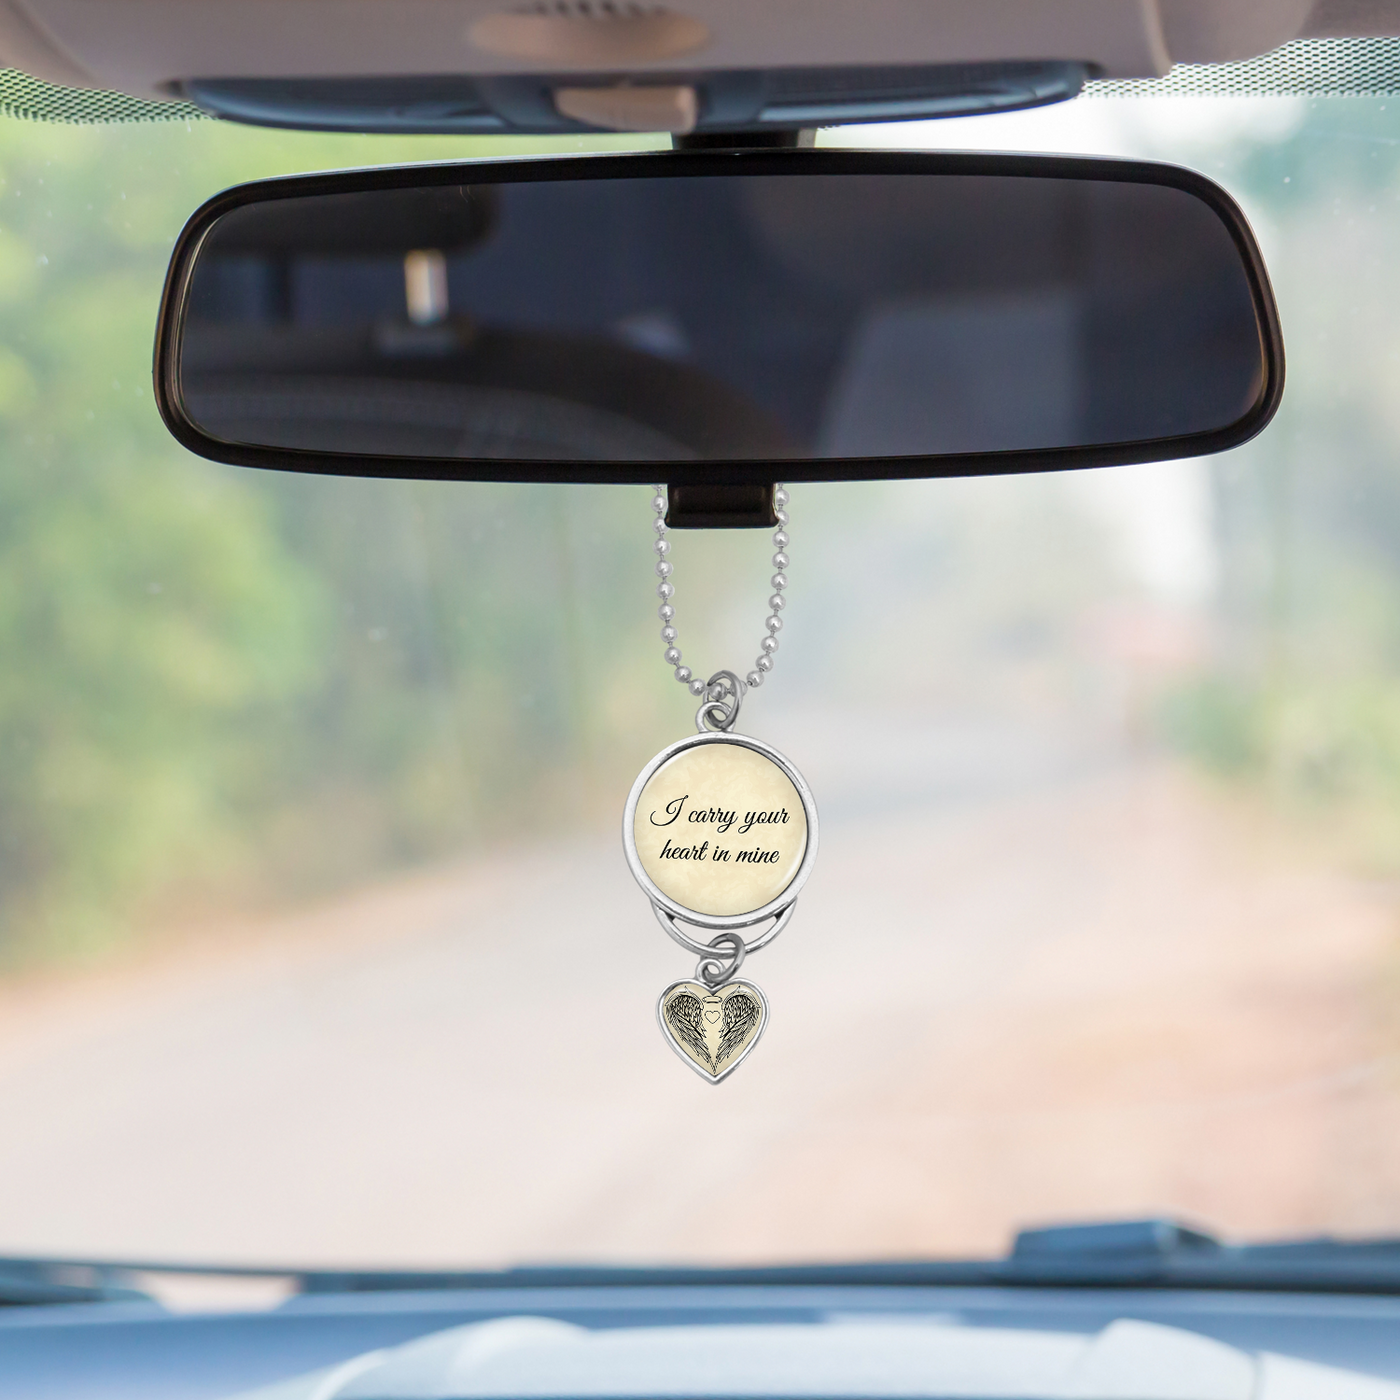 I Carry Your Heart In Mine Rearview Mirror Charm